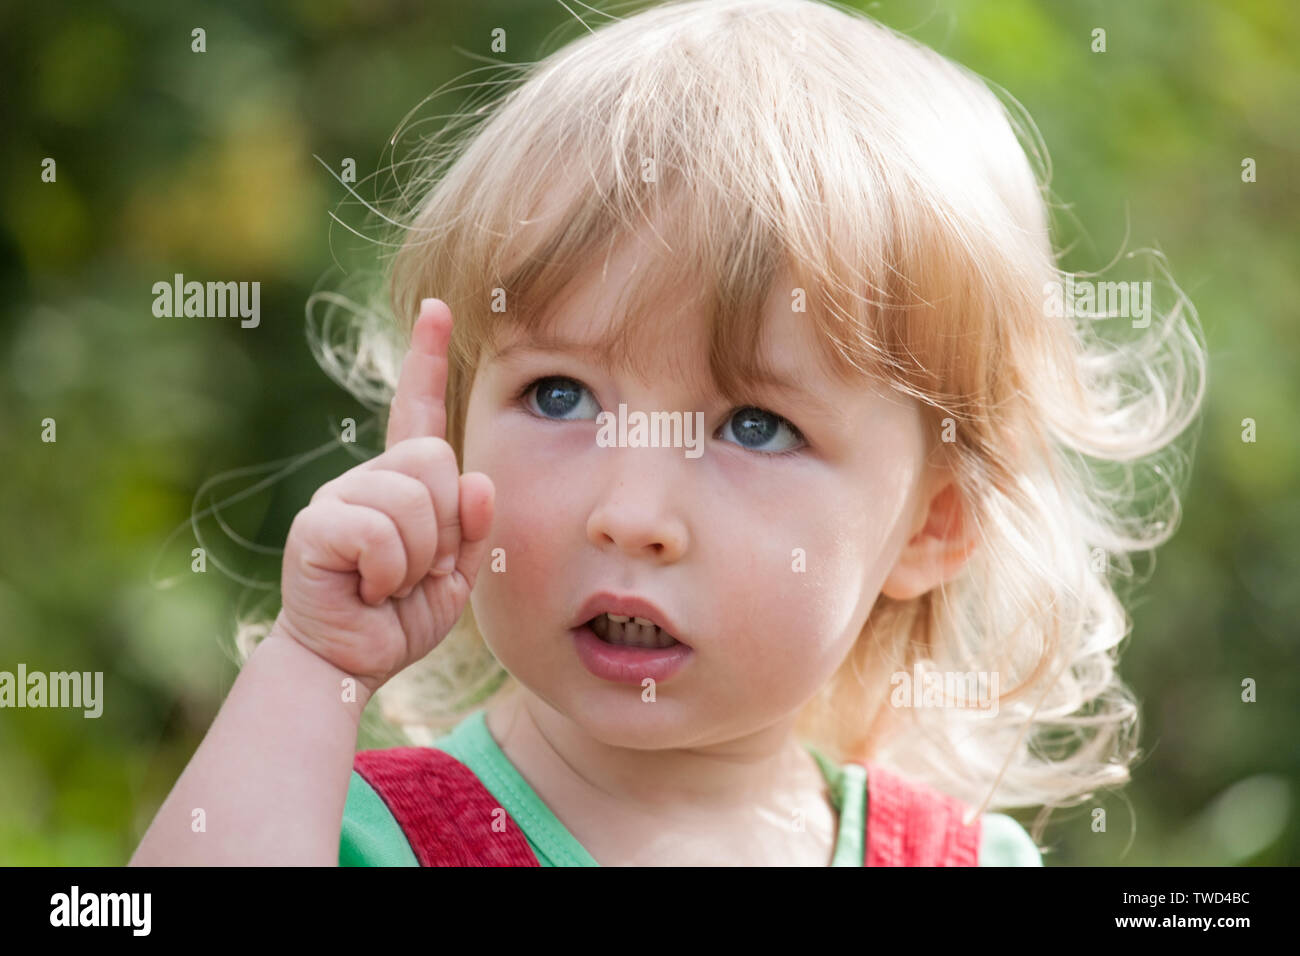 little child face and index finger pointing up closeup view on green outdoor background Stock Photo